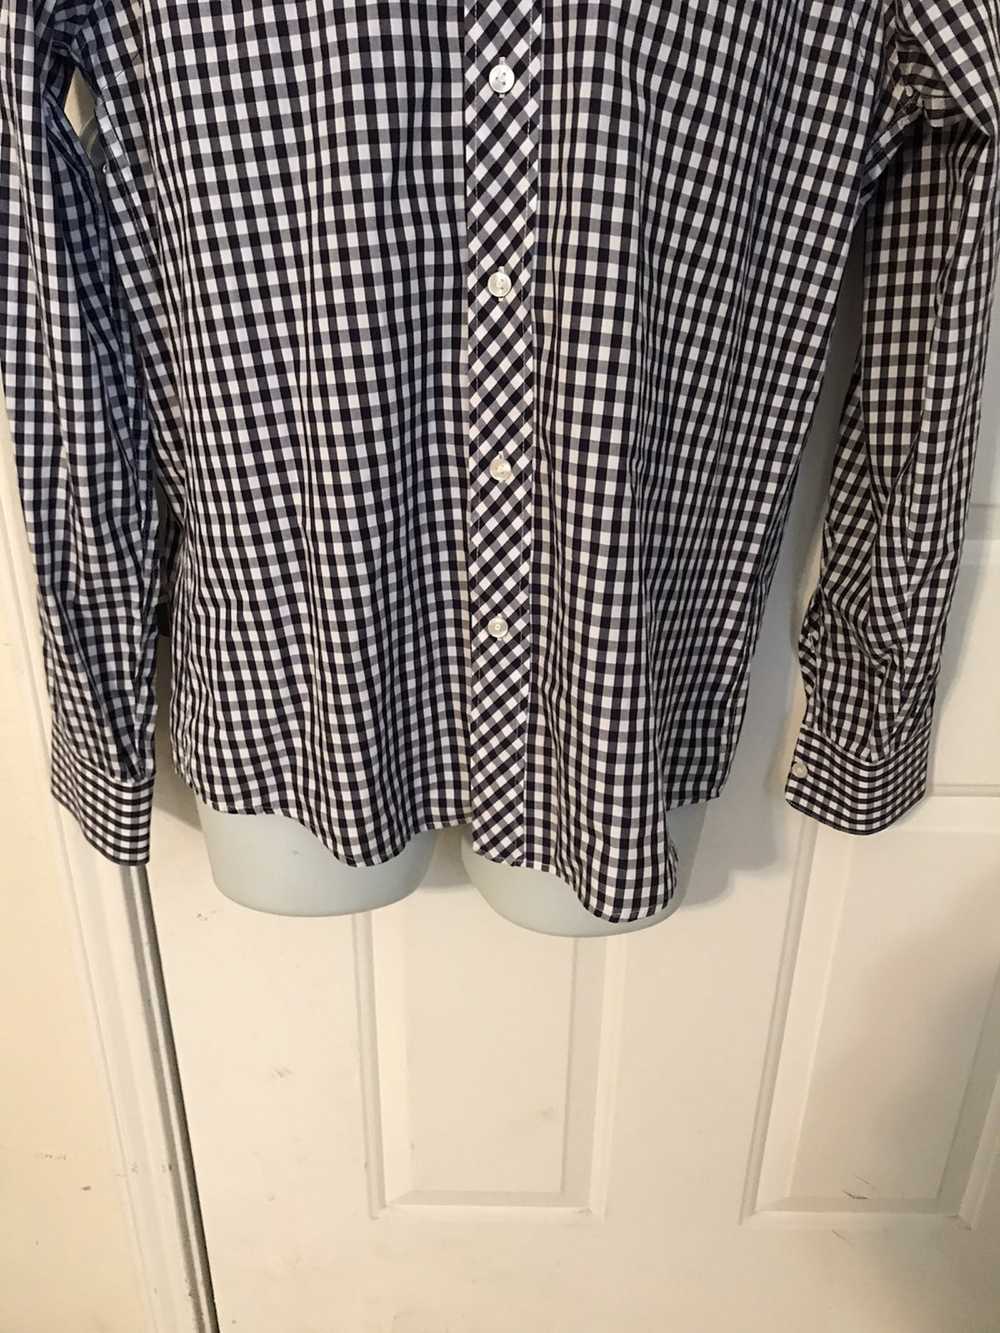 G Star Raw S.O. Squad Gingham Check button down s… - image 3